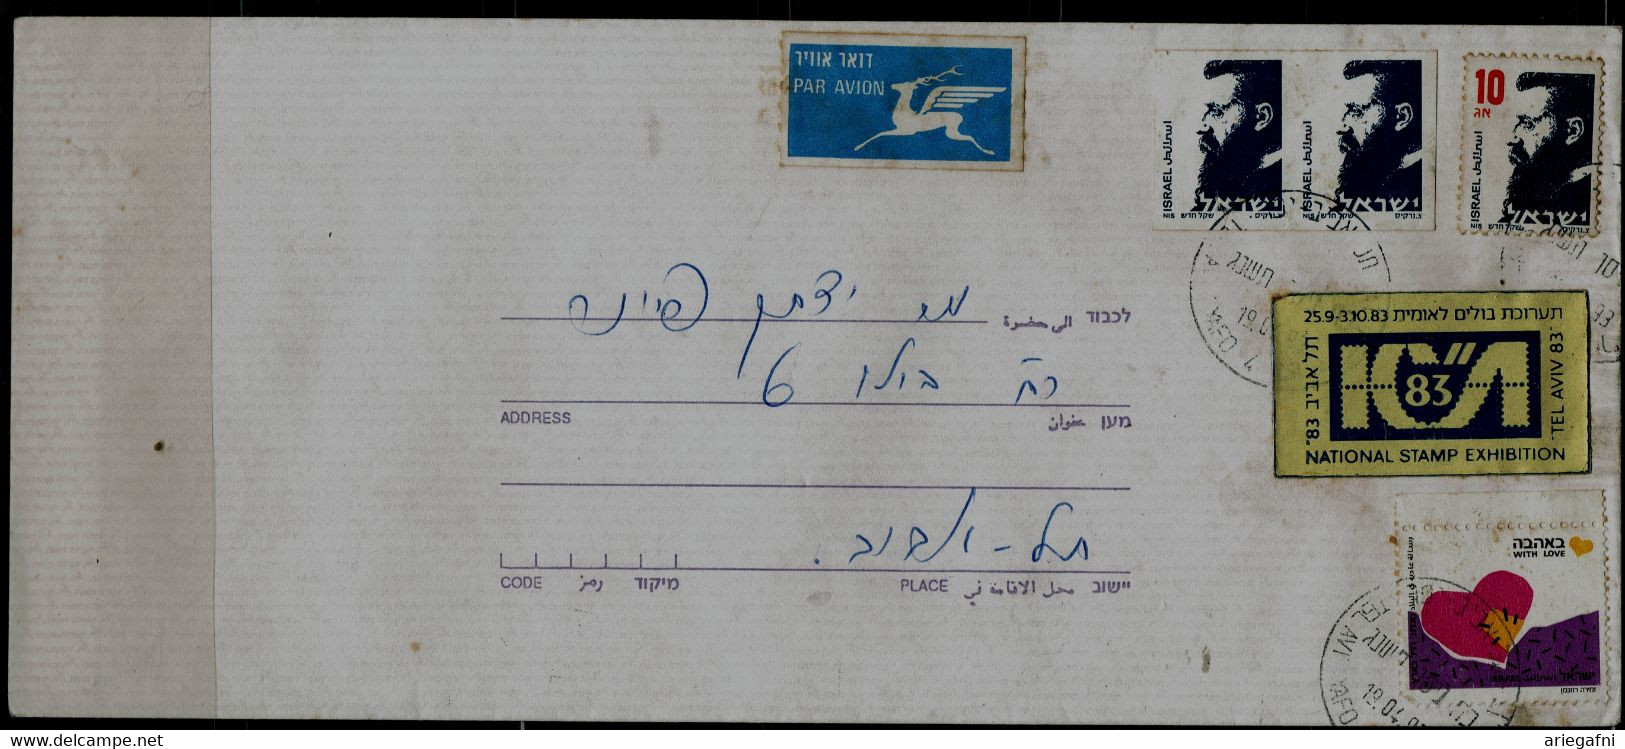 ISRAEL 1993 COVER WITH HERZEL PAIR IMPERF SENT IN 19/4/93 FROM TEL AVIV VF!! - Imperforates, Proofs & Errors